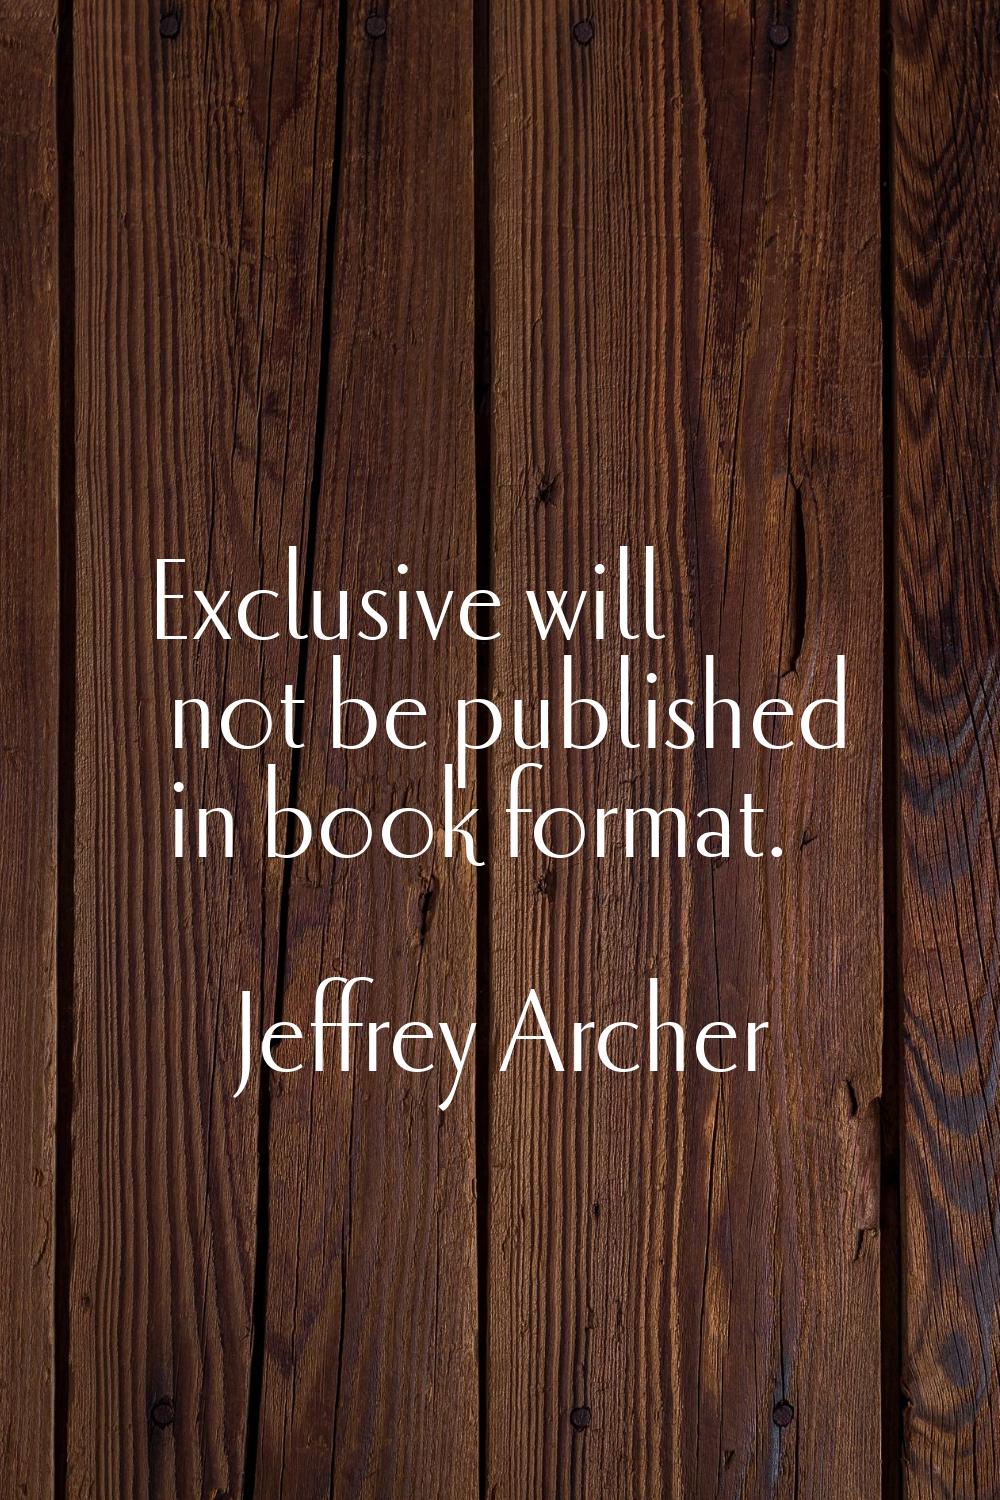 Exclusive will not be published in book format.